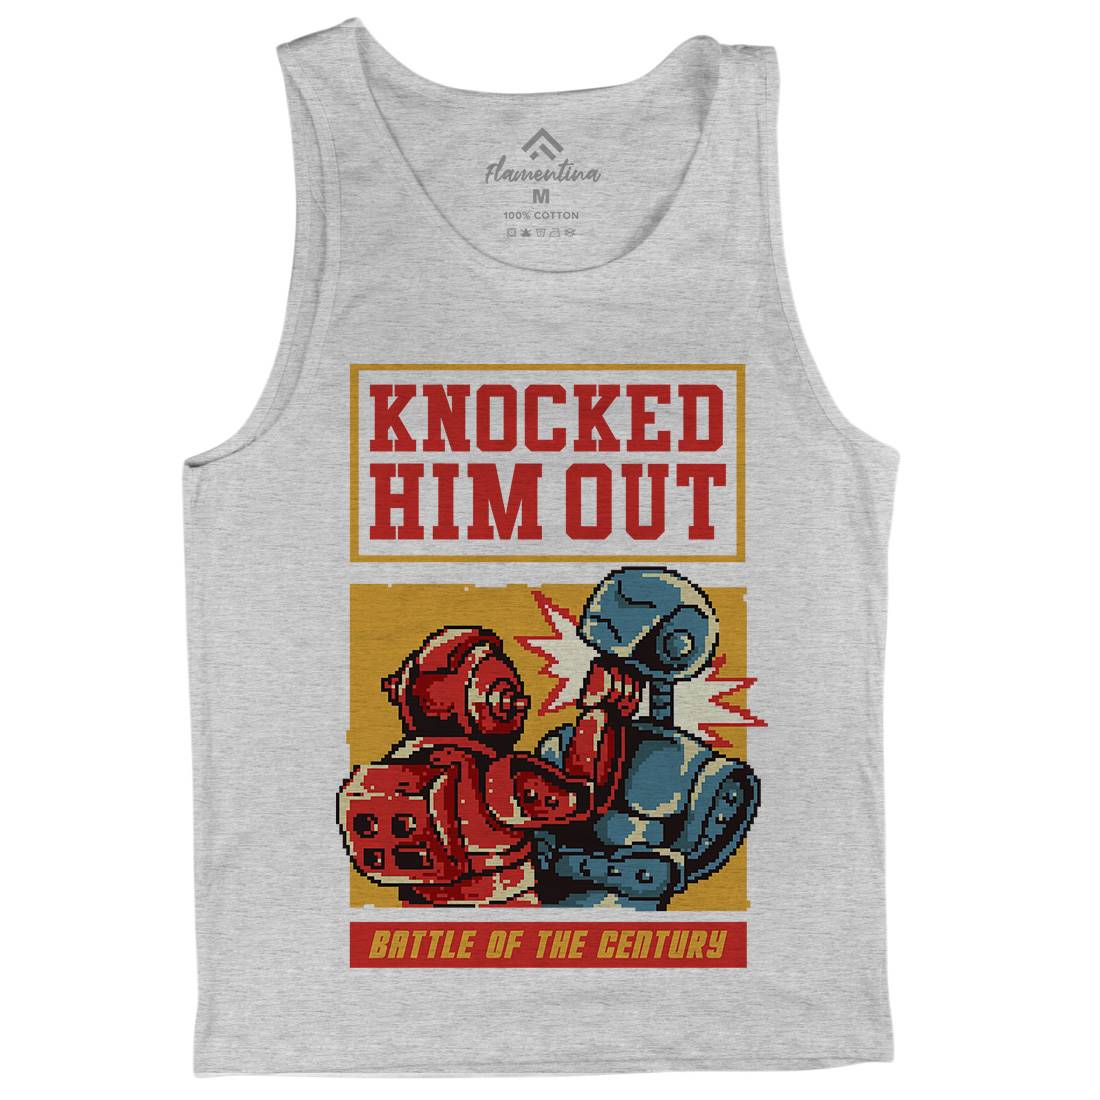 Knocked Him Out Mens Tank Top Vest Space B923